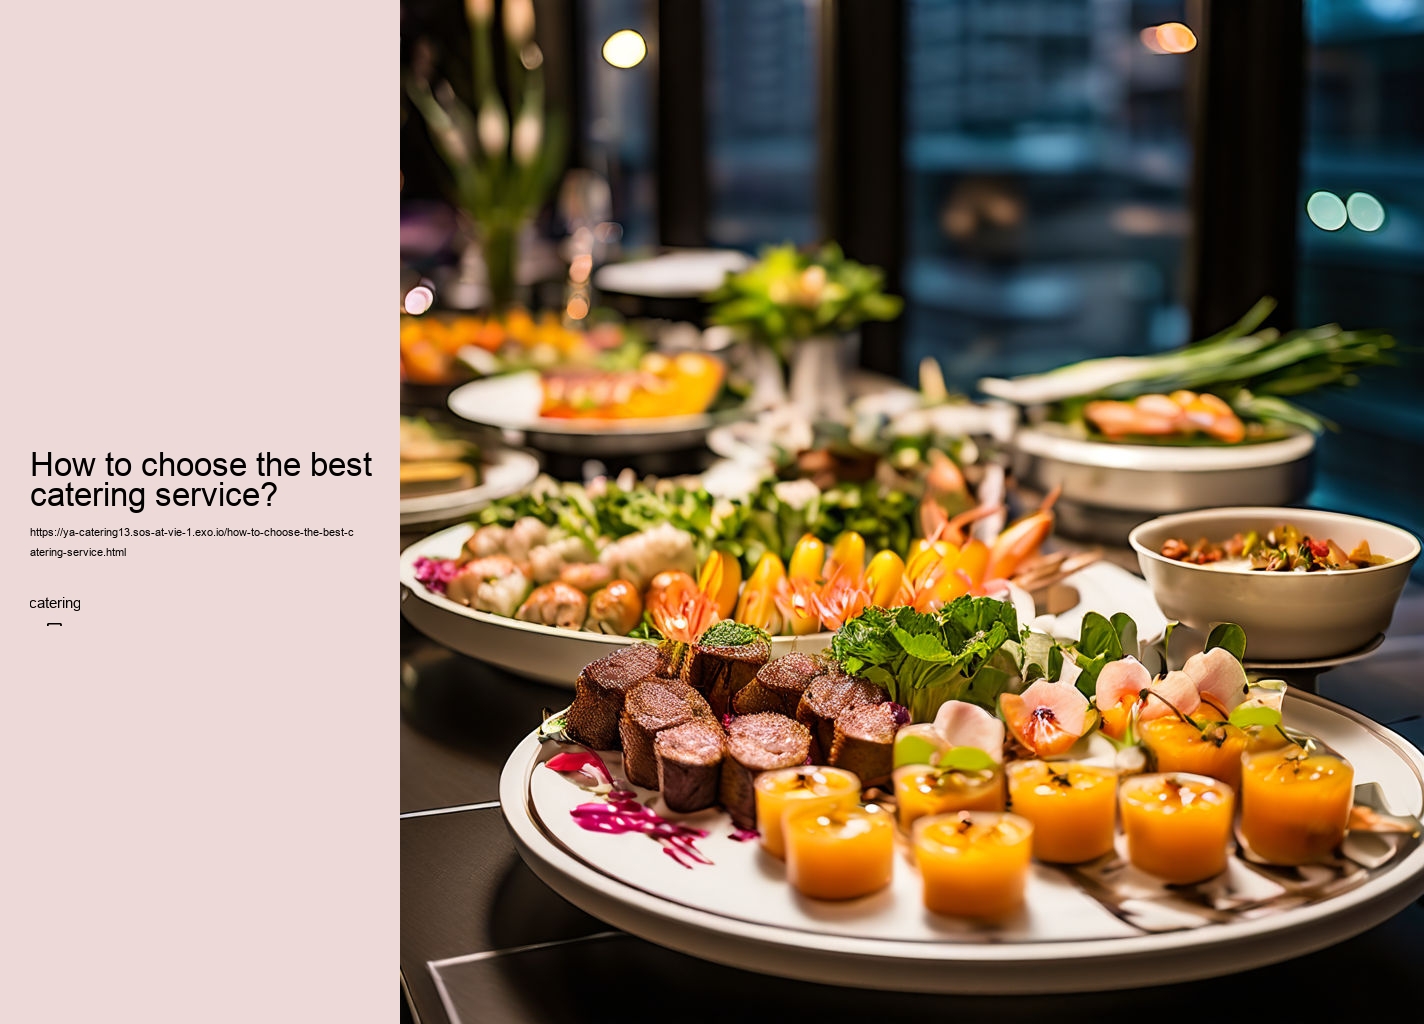 How to choose the best catering service?